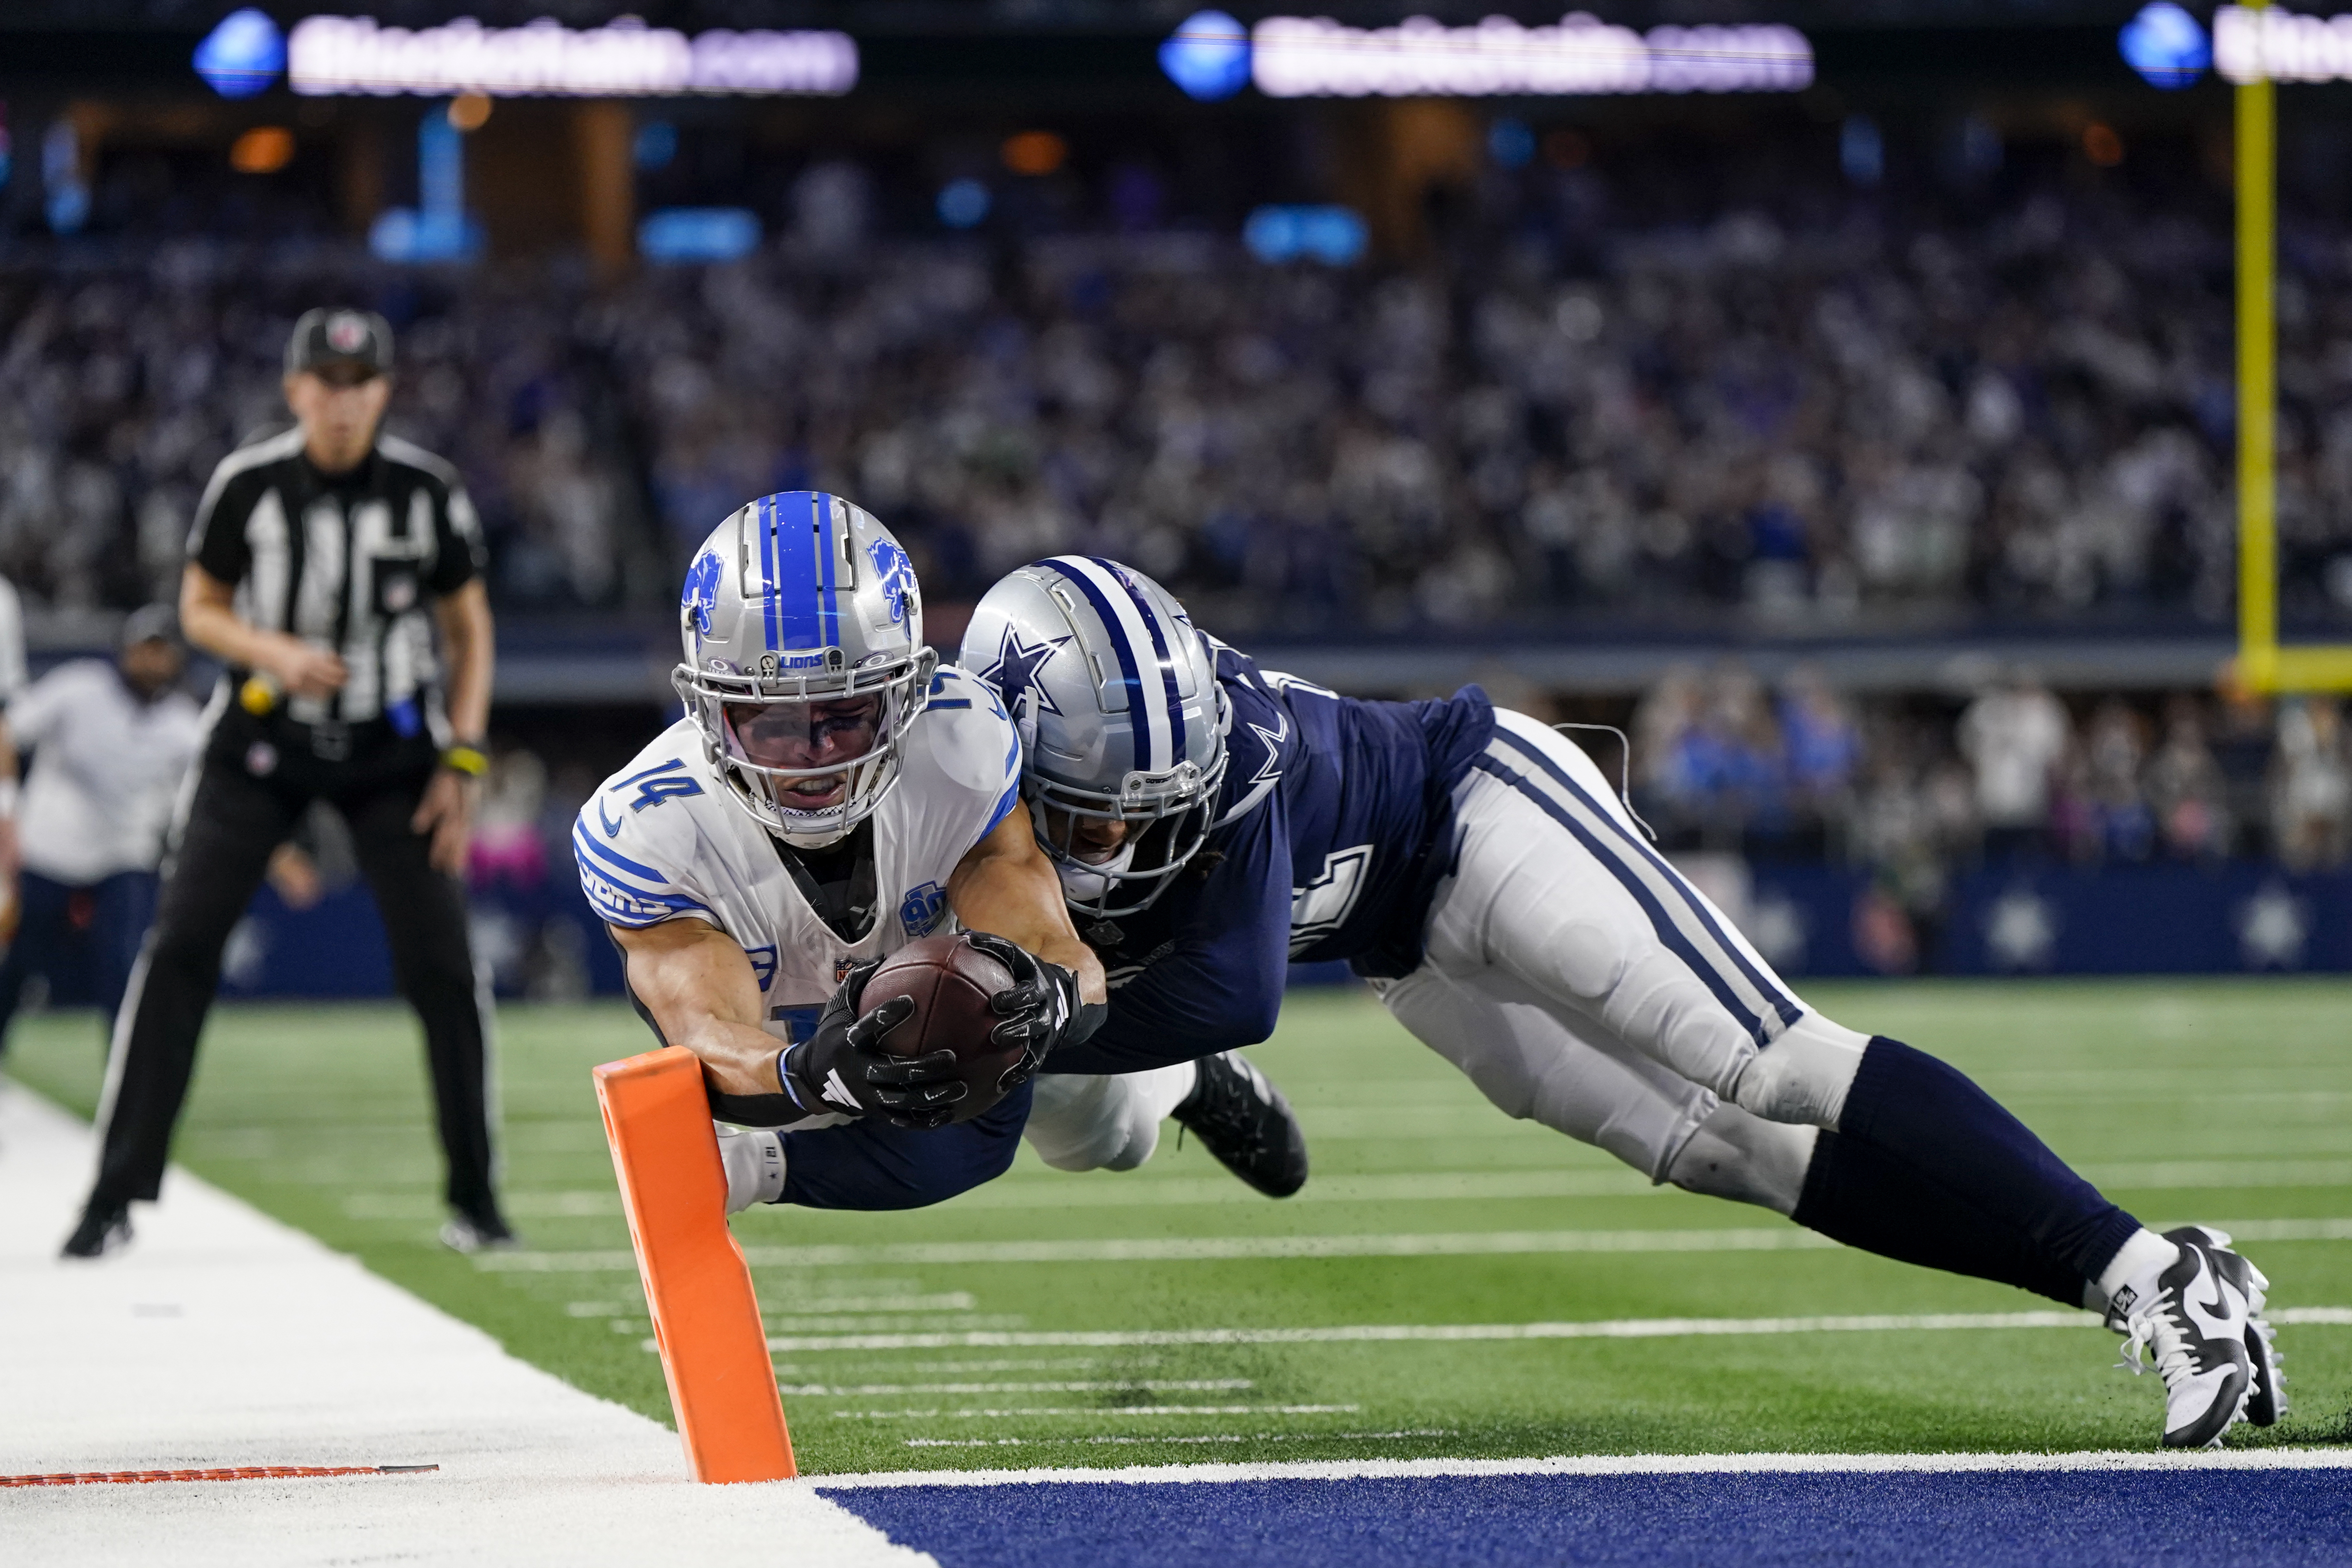 NFL's explanation contradicts Lions' side of questionable finish